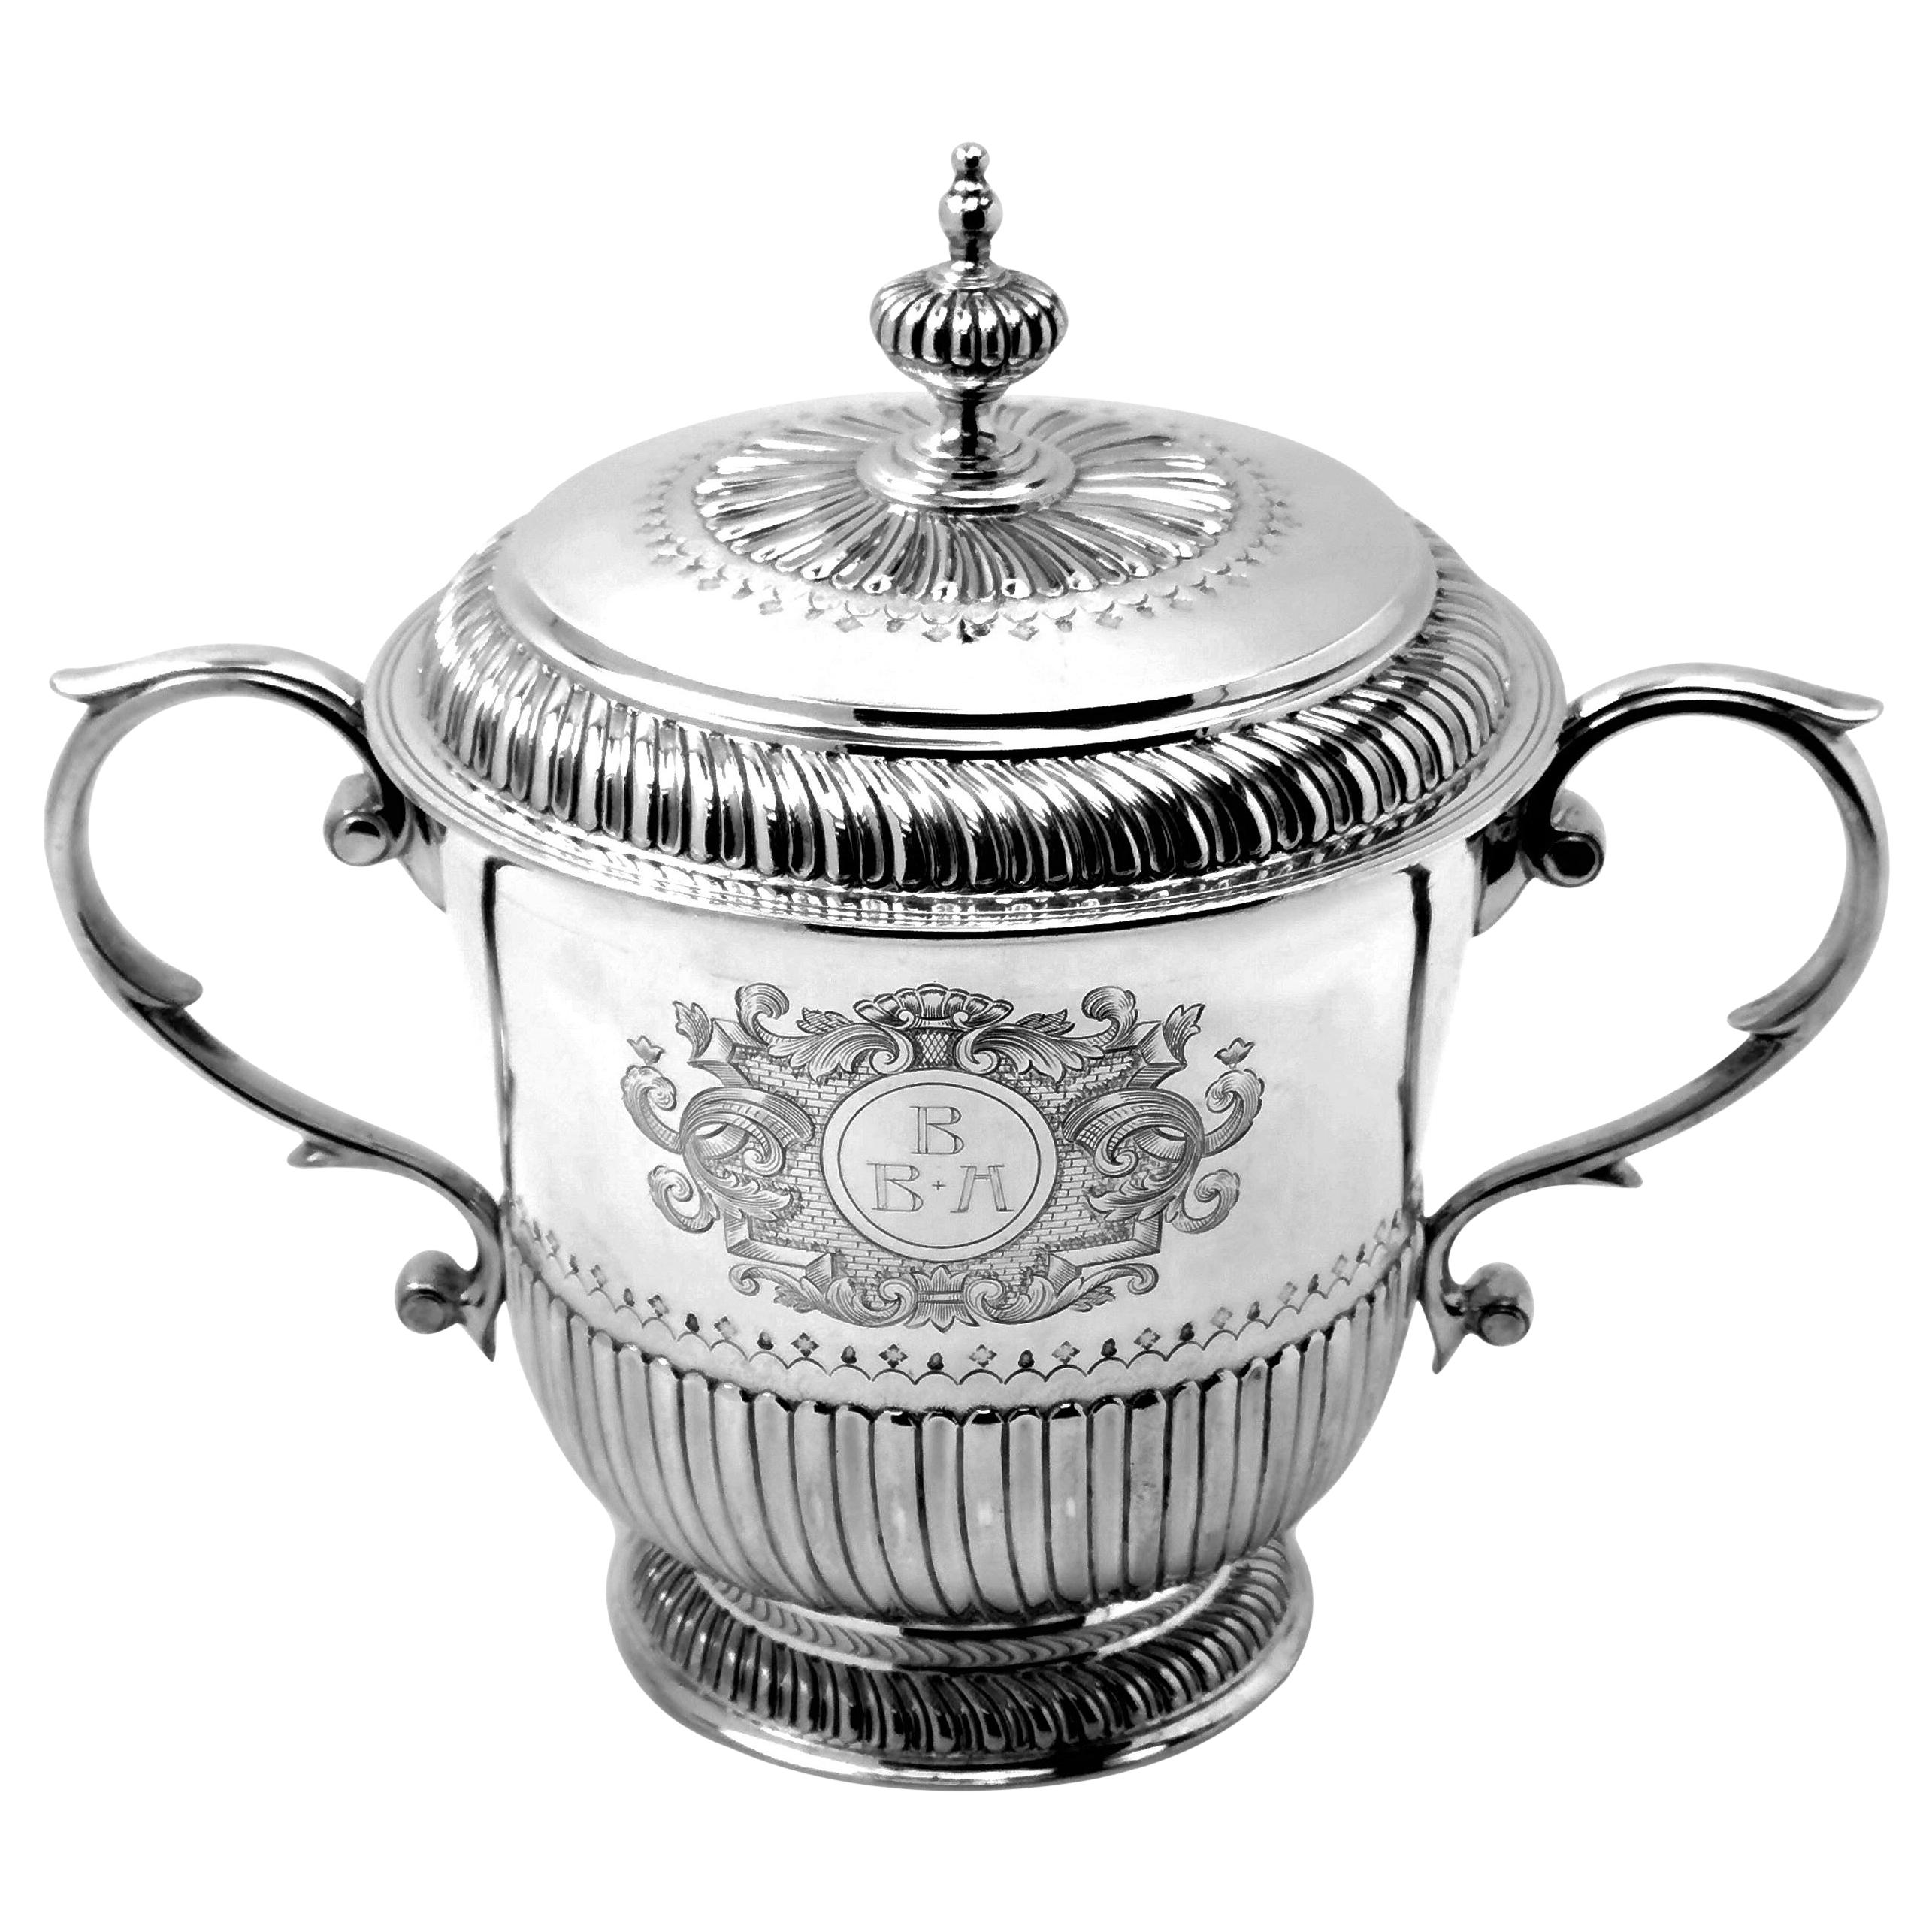 Antique Silver Lidded Porringer Cup & Cover 1911 William III 17th Century Style For Sale